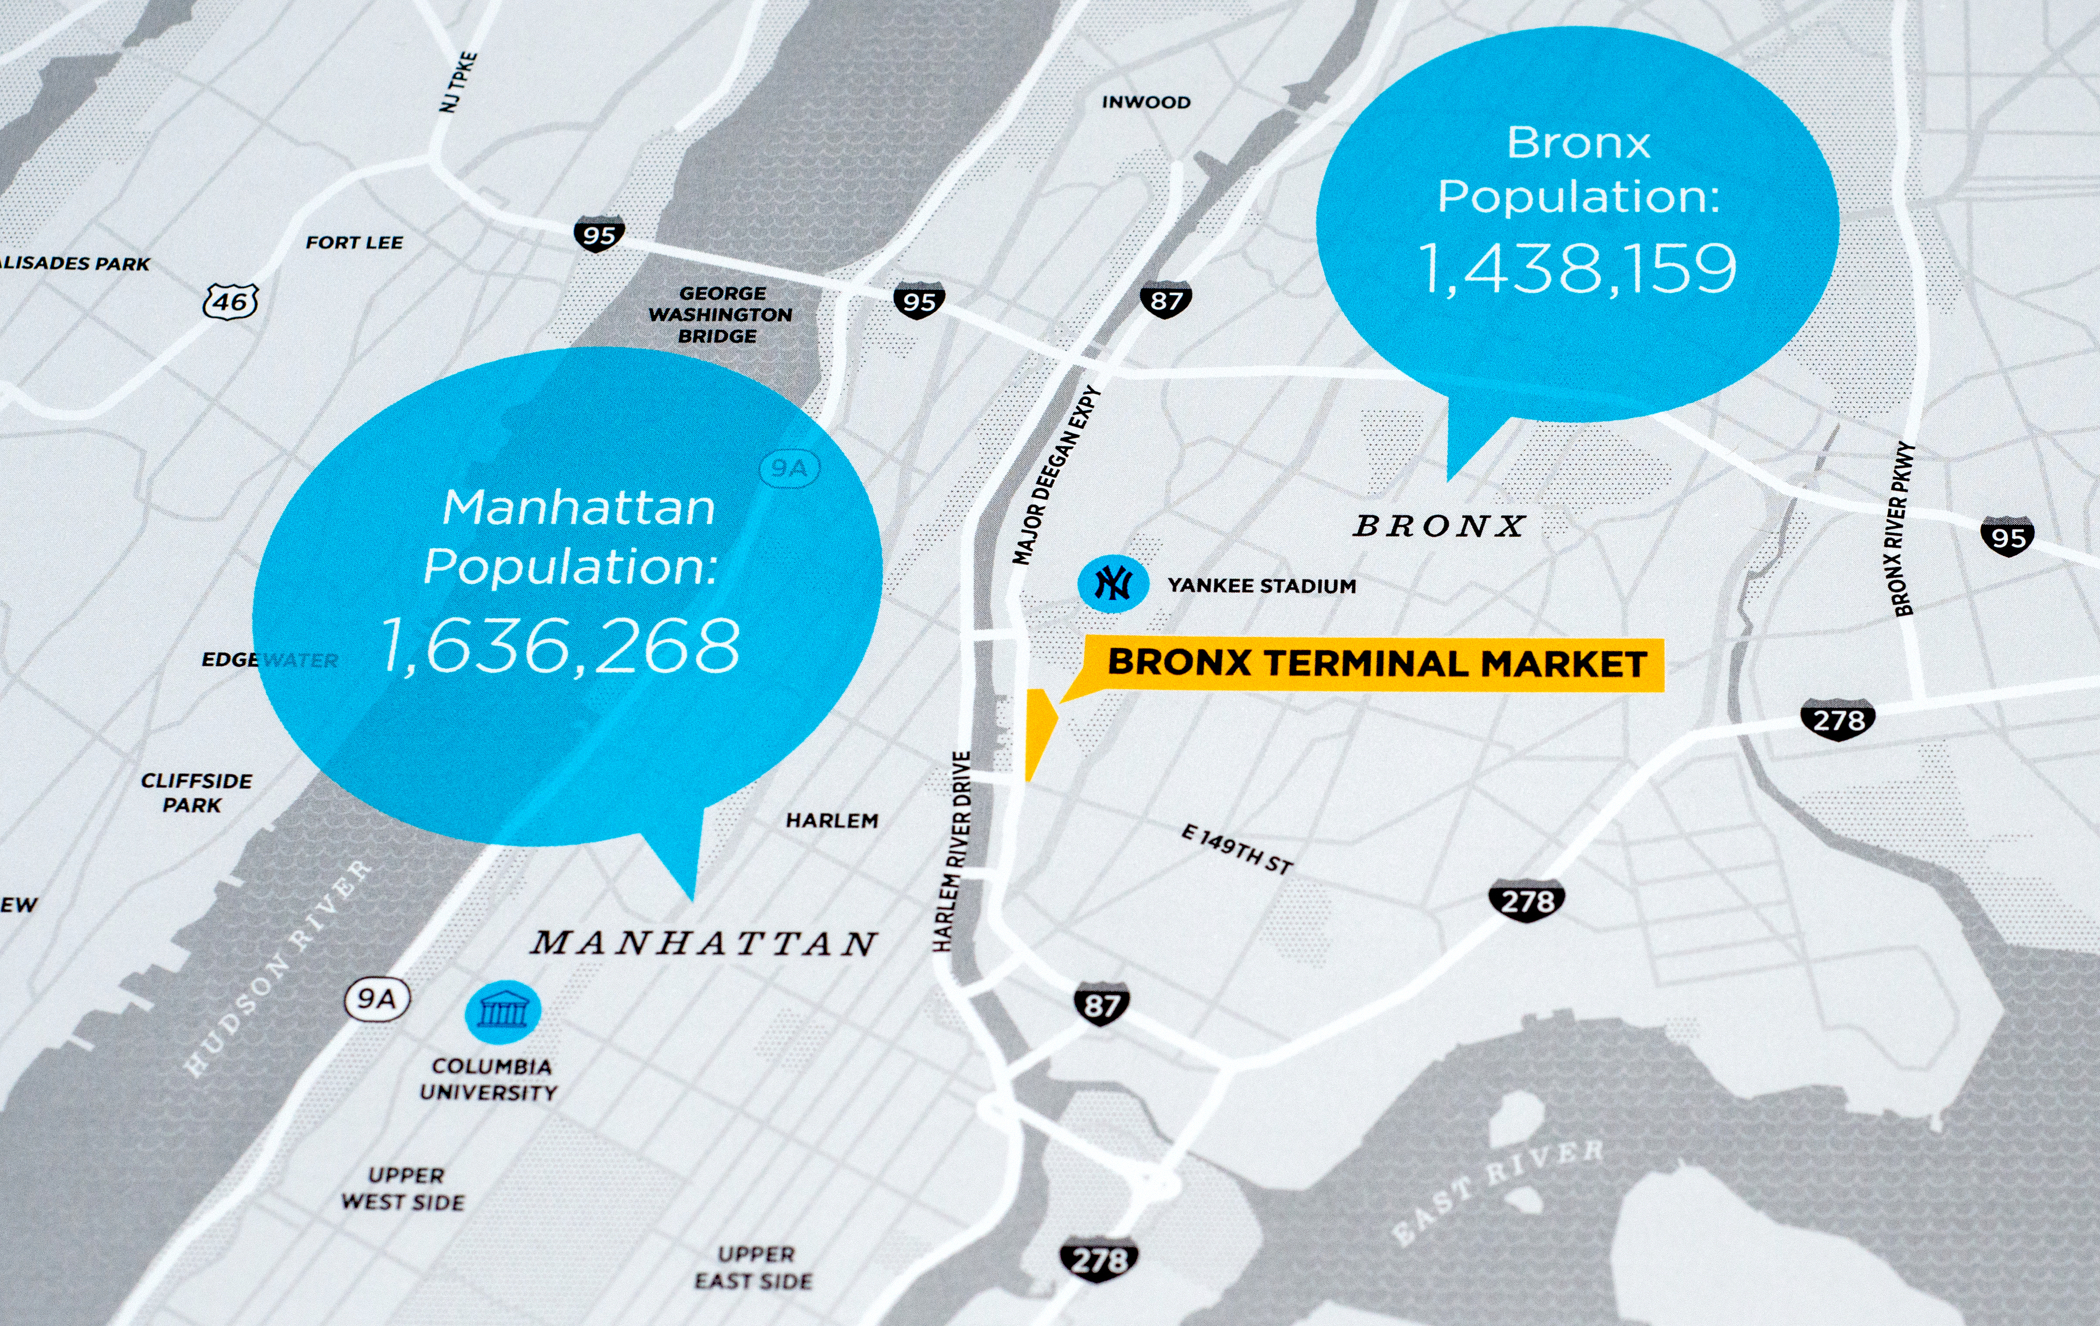 A close up of a map showing the location of the Bronx Terminal Market with population statistics for the Bronx and Manhattan.